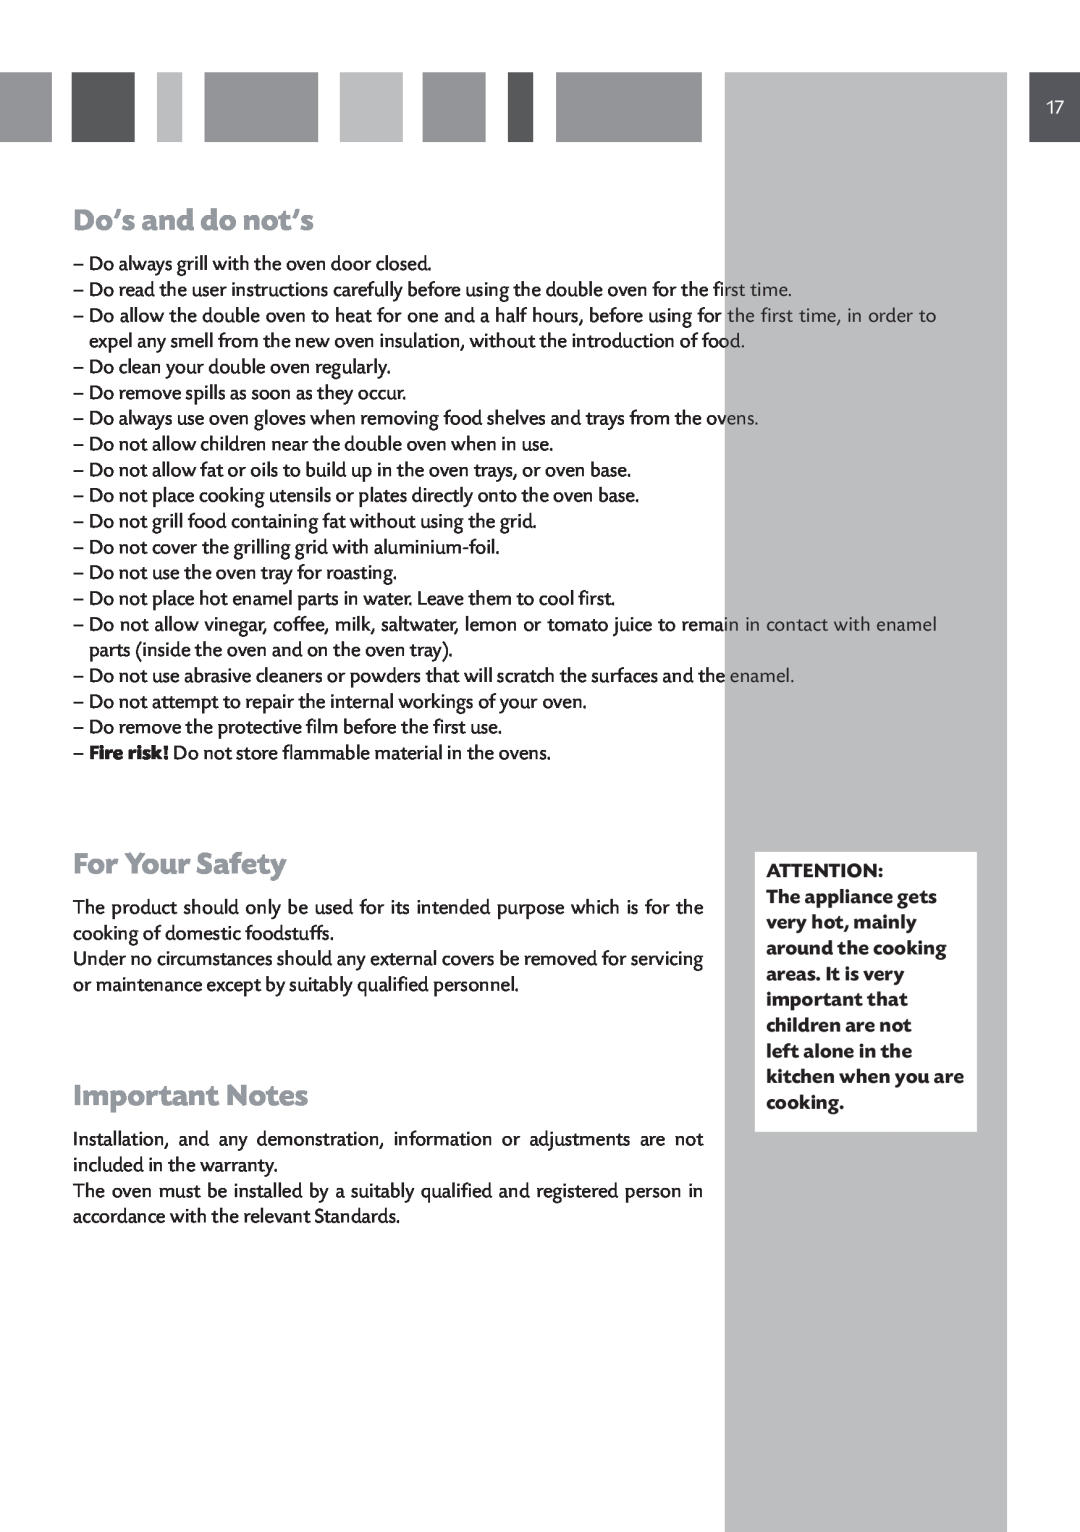 CDA DC730 manual Do’s and do not’s, For Your Safety, Important Notes 